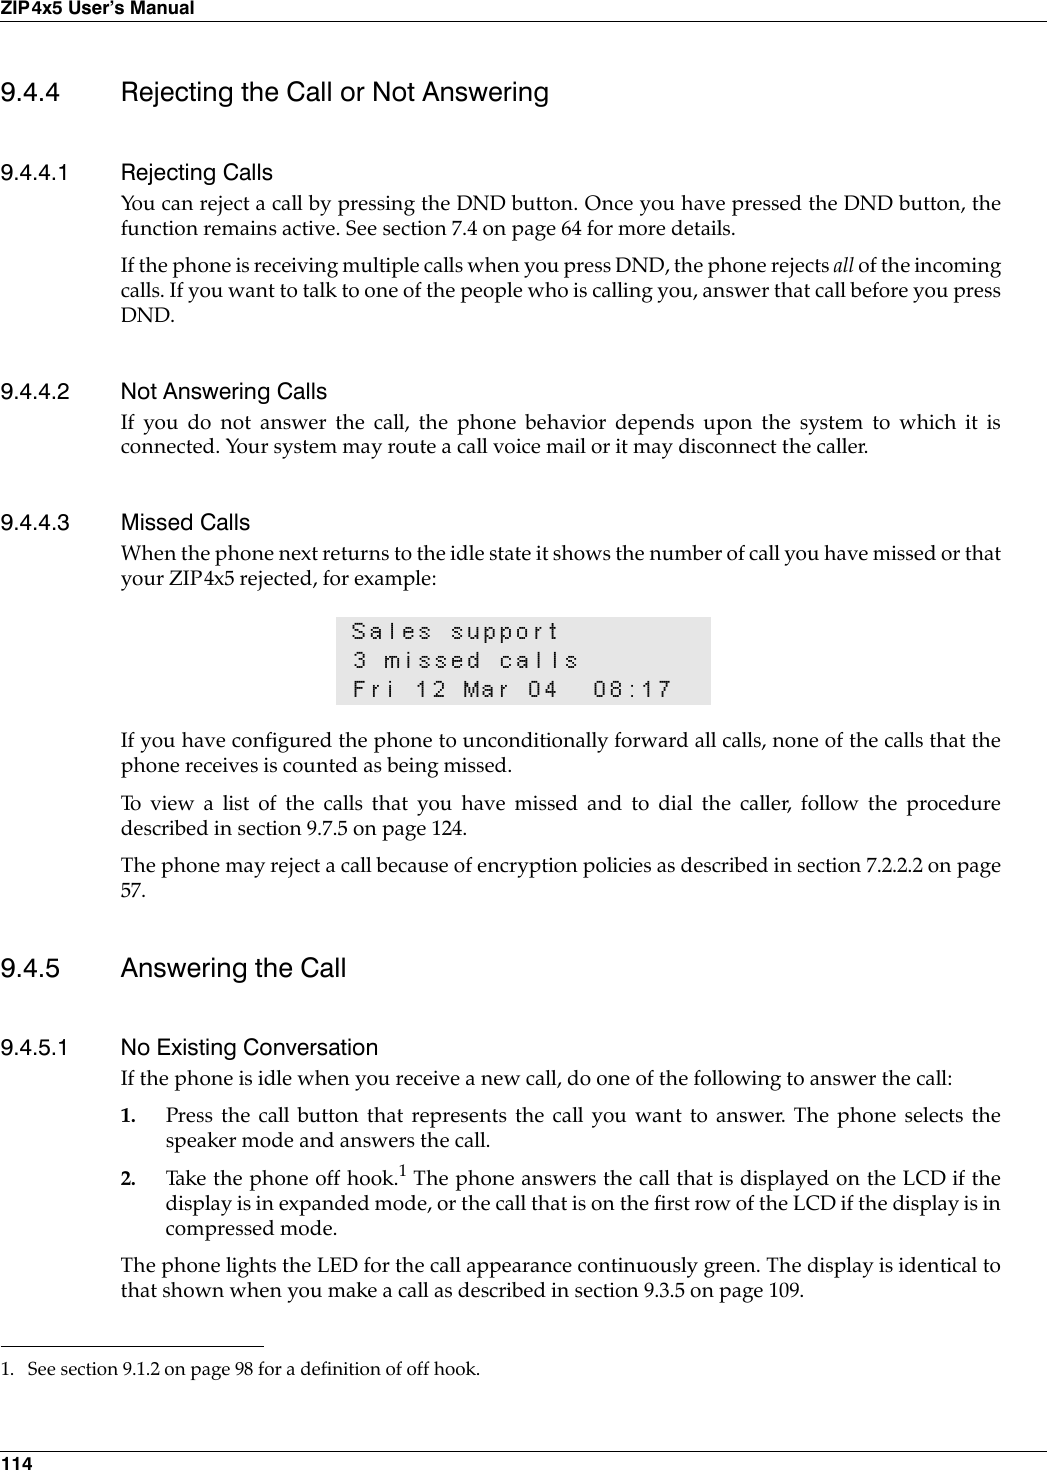 114ZIP4x5 User’s Manual9.4.4 Rejecting the Call or Not Answering9.4.4.1 Rejecting CallsYou can reject a call by pressing the DND button. Once you have pressed the DND button, thefunction remains active. See section 7.4 on page 64 for more details.If the phone is receiving multiple calls when you press DND, the phone rejects all of the incomingcalls. If you want to talk to one of the people who is calling you, answer that call before you pressDND.9.4.4.2 Not Answering CallsIf you do not answer the call, the phone behavior depends upon the system to which it isconnected. Your system may route a call voice mail or it may disconnect the caller.9.4.4.3 Missed CallsWhen the phone next returns to the idle state it shows the number of call you have missed or thatyour ZIP4x5 rejected, for example:If you have configured the phone to unconditionally forward all calls, none of the calls that thephone receives is counted as being missed.To view a list of the calls that you have missed and to dial the caller, follow the proceduredescribed in section 9.7.5 on page 124.The phone may reject a call because of encryption policies as described in section 7.2.2.2 on page57.9.4.5 Answering the Call9.4.5.1 No Existing ConversationIf the phone is idle when you receive a new call, do one of the following to answer the call:1. Press the call button that represents the call you want to answer. The phone selects thespeaker mode and answers the call.2. Take the phone off hook.1 The phone answers the call that is displayed on the LCD if thedisplay is in expanded mode, or the call that is on the first row of the LCD if the display is incompressed mode.The phone lights the LED for the call appearance continuously green. The display is identical tothat shown when you make a call as described in section 9.3.5 on page 109.Sales support3 missed callsFri 12 Mar 04 08:171. See section 9.1.2 on page 98 for a definition of off hook.